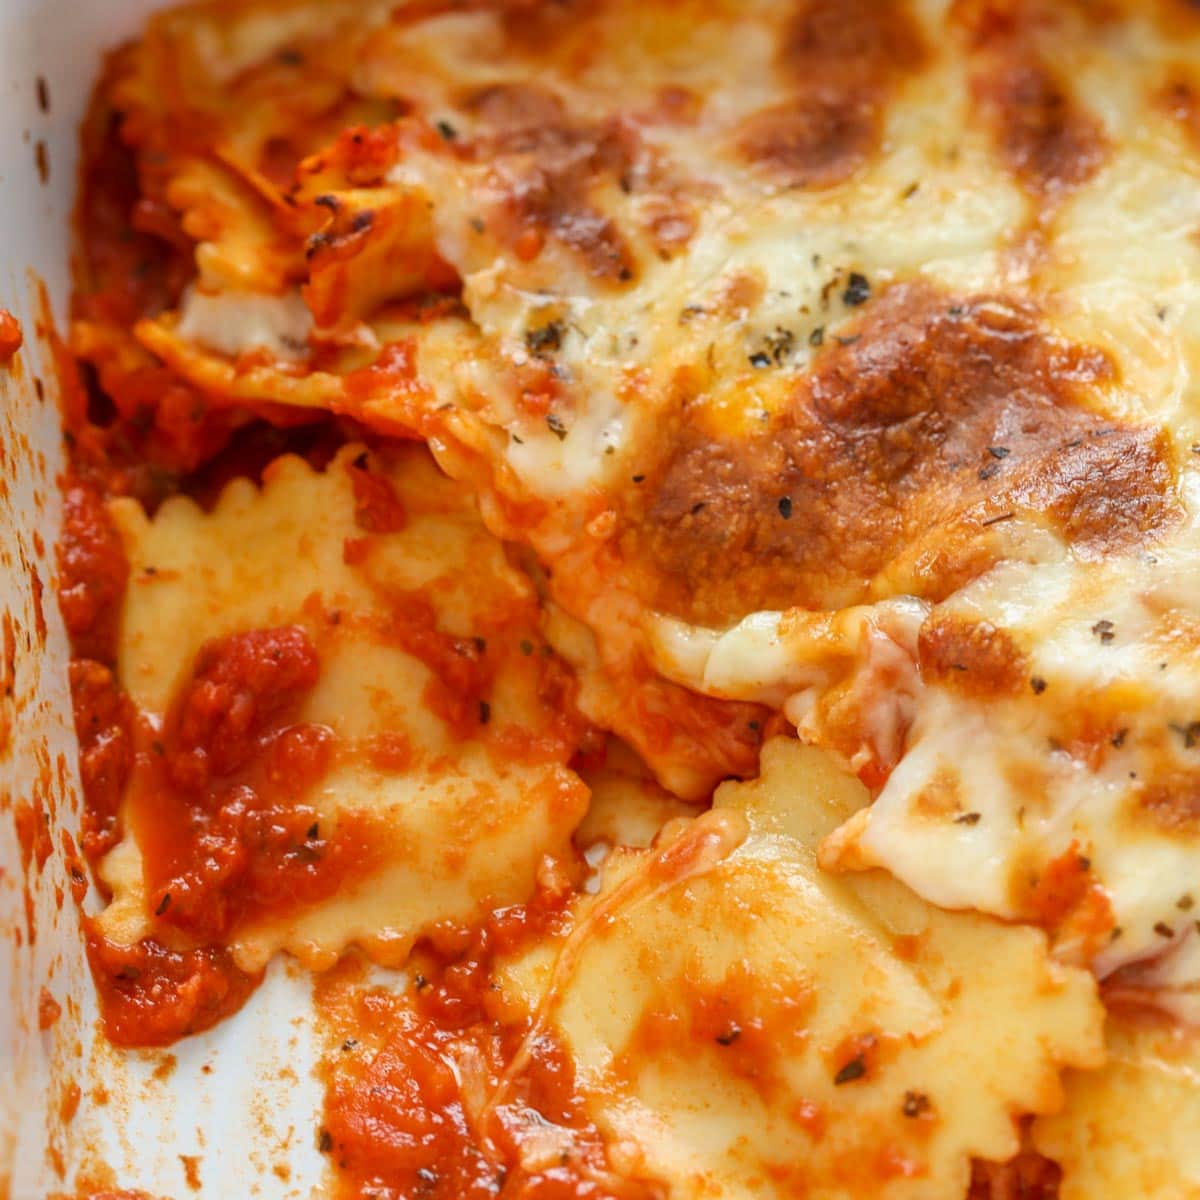 Quick dinner ideas - a casserole of cheesy baked ravioli.